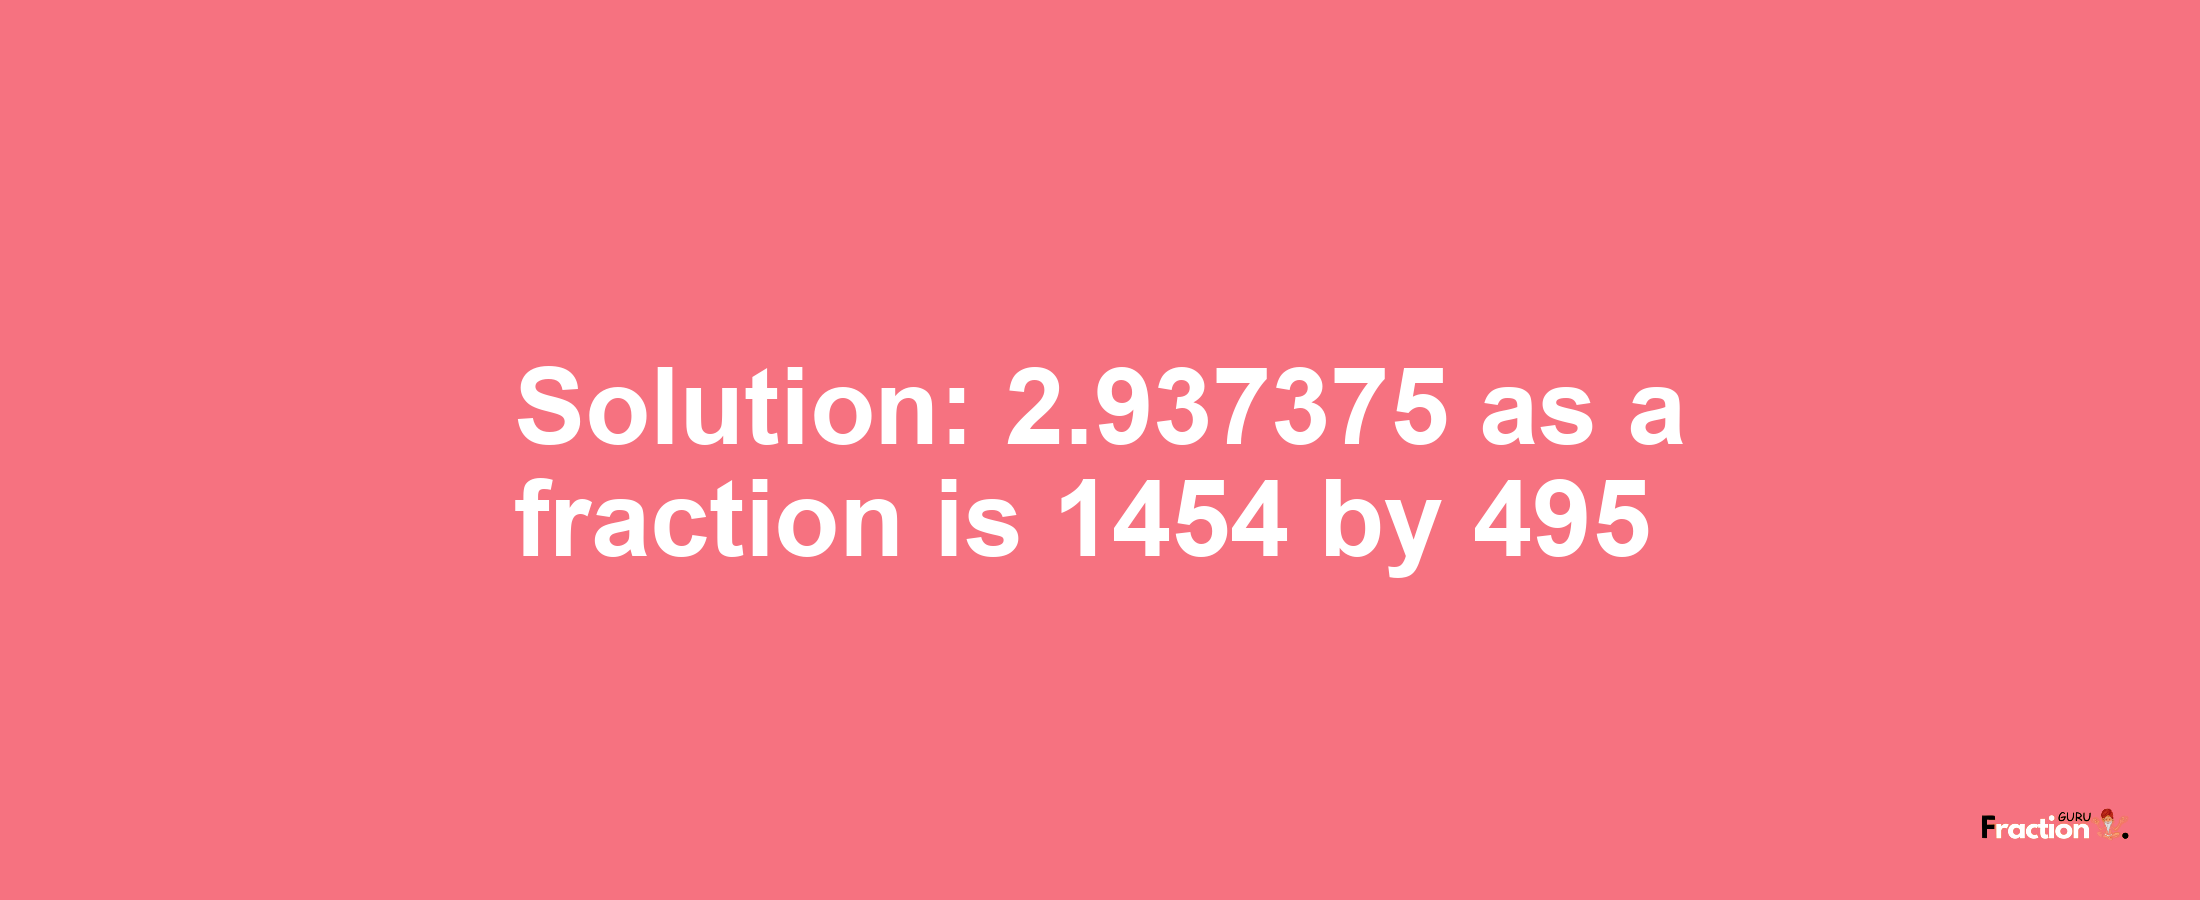 Solution:2.937375 as a fraction is 1454/495